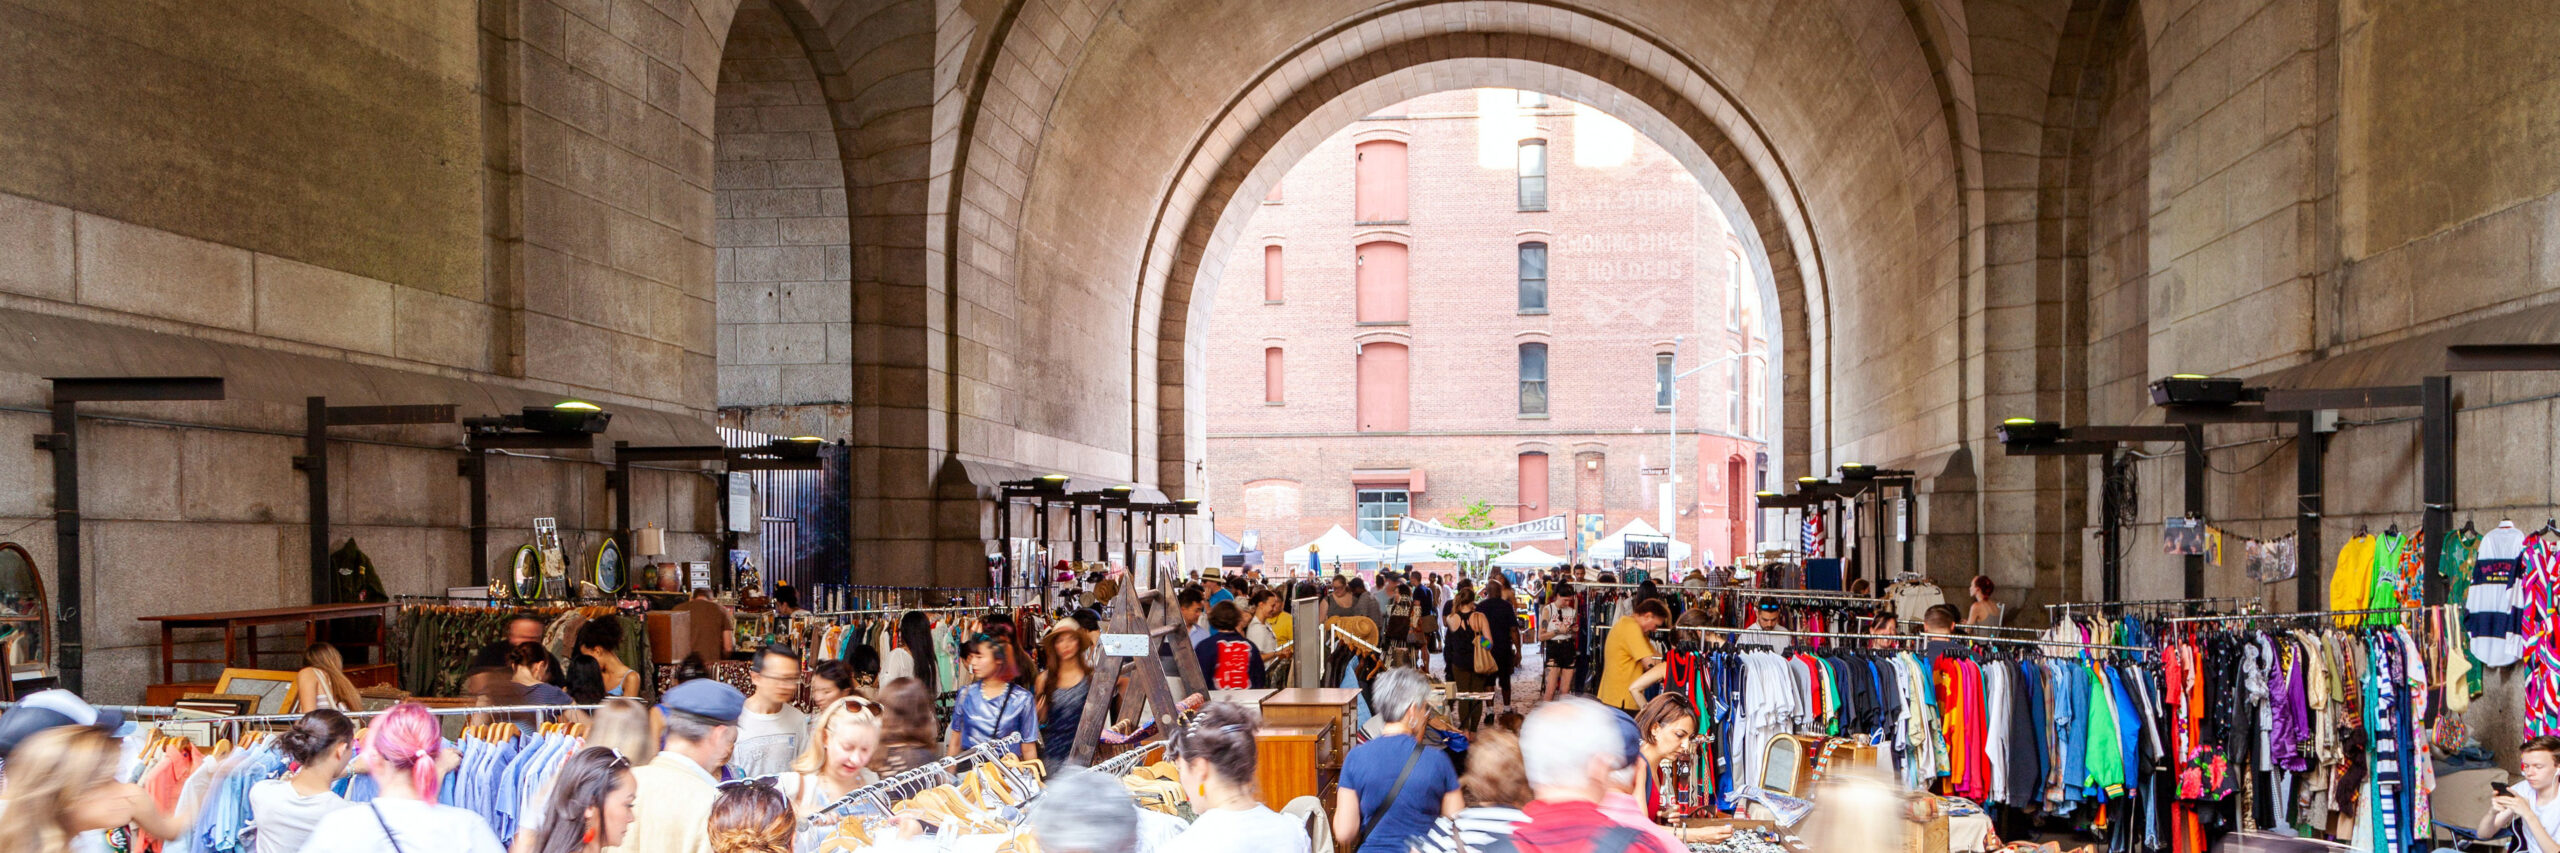 NYC Brooklyn DUMBO Improvement District - Small Business & Community - Events in the Archway - The Brooklyn Flea